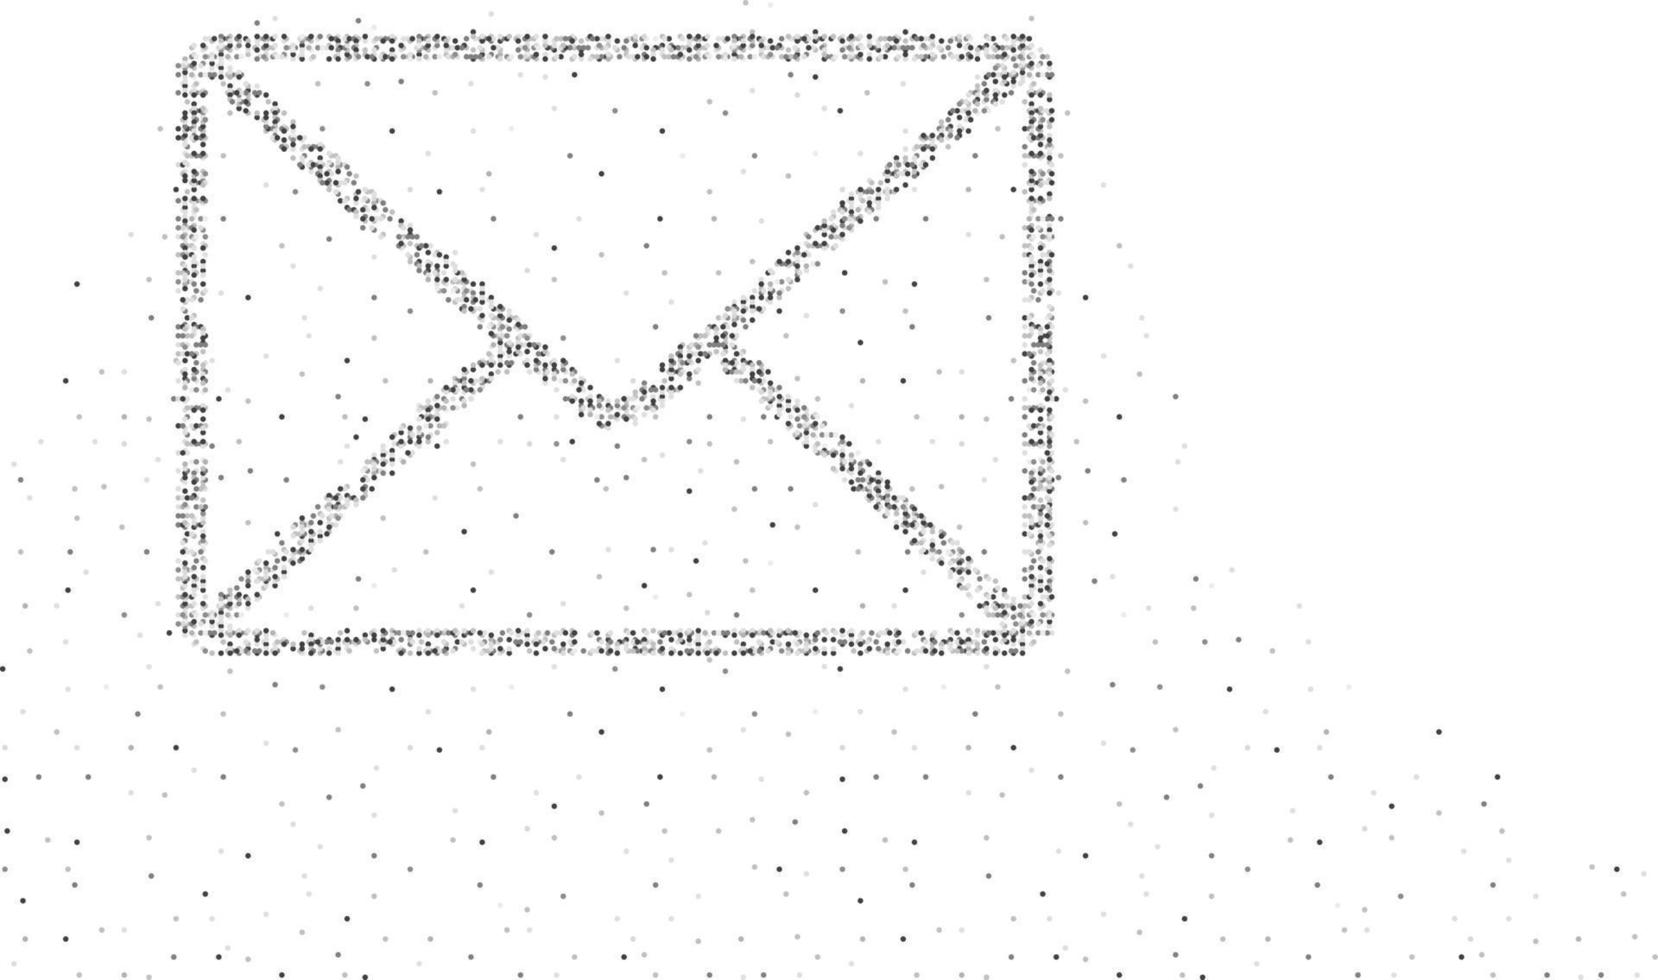 Email symbol shape Particle Geometric Circle dot pixel pattern, You got mail concept design black color illustration on white background with space, vector eps